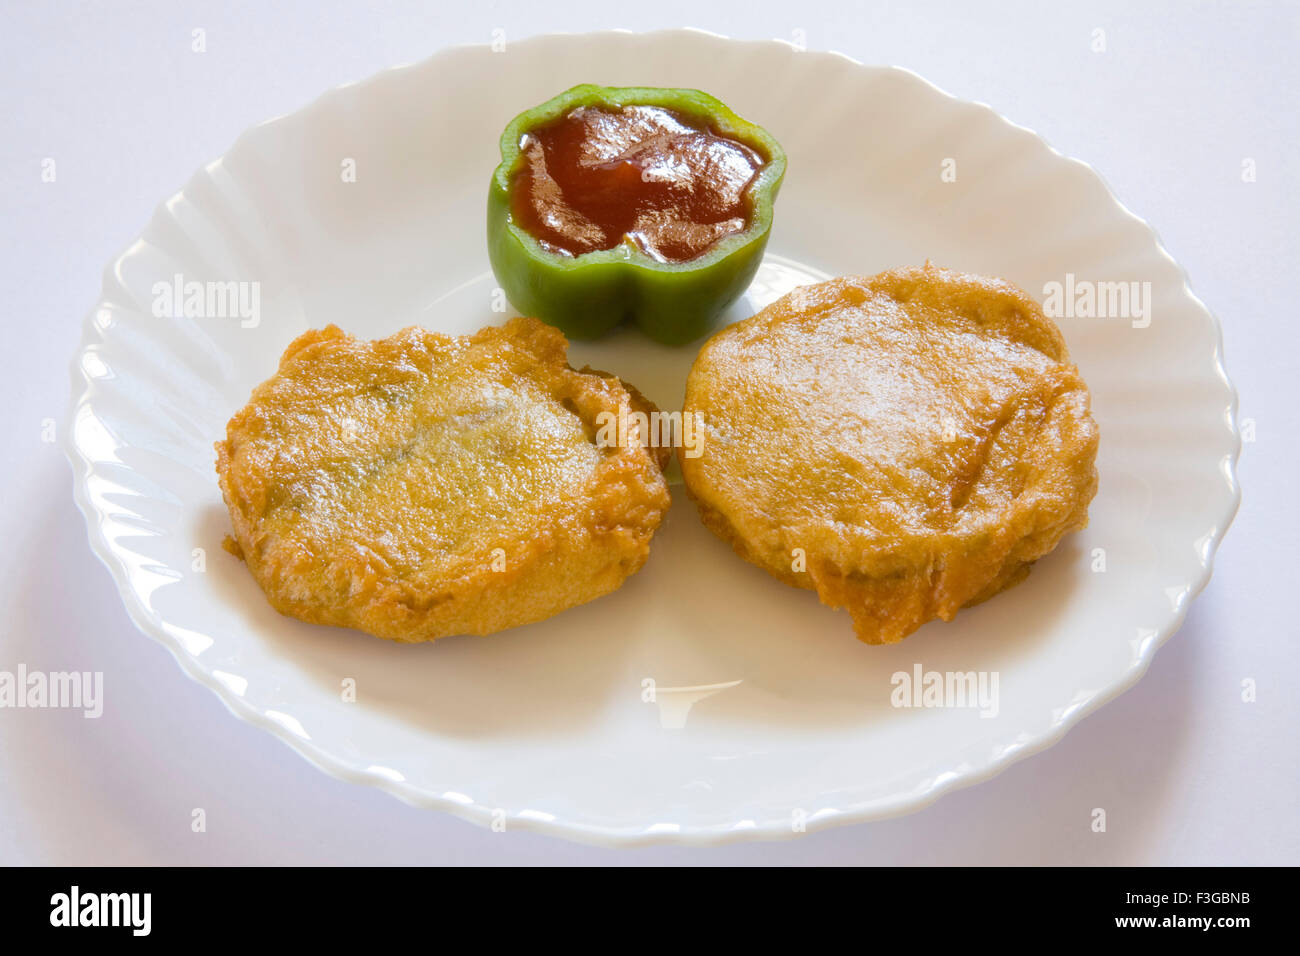 Indian fast food fried batata or potatoes vada with chopped green chilli served ih chutneys tomato ketchup served plate Stock Photo